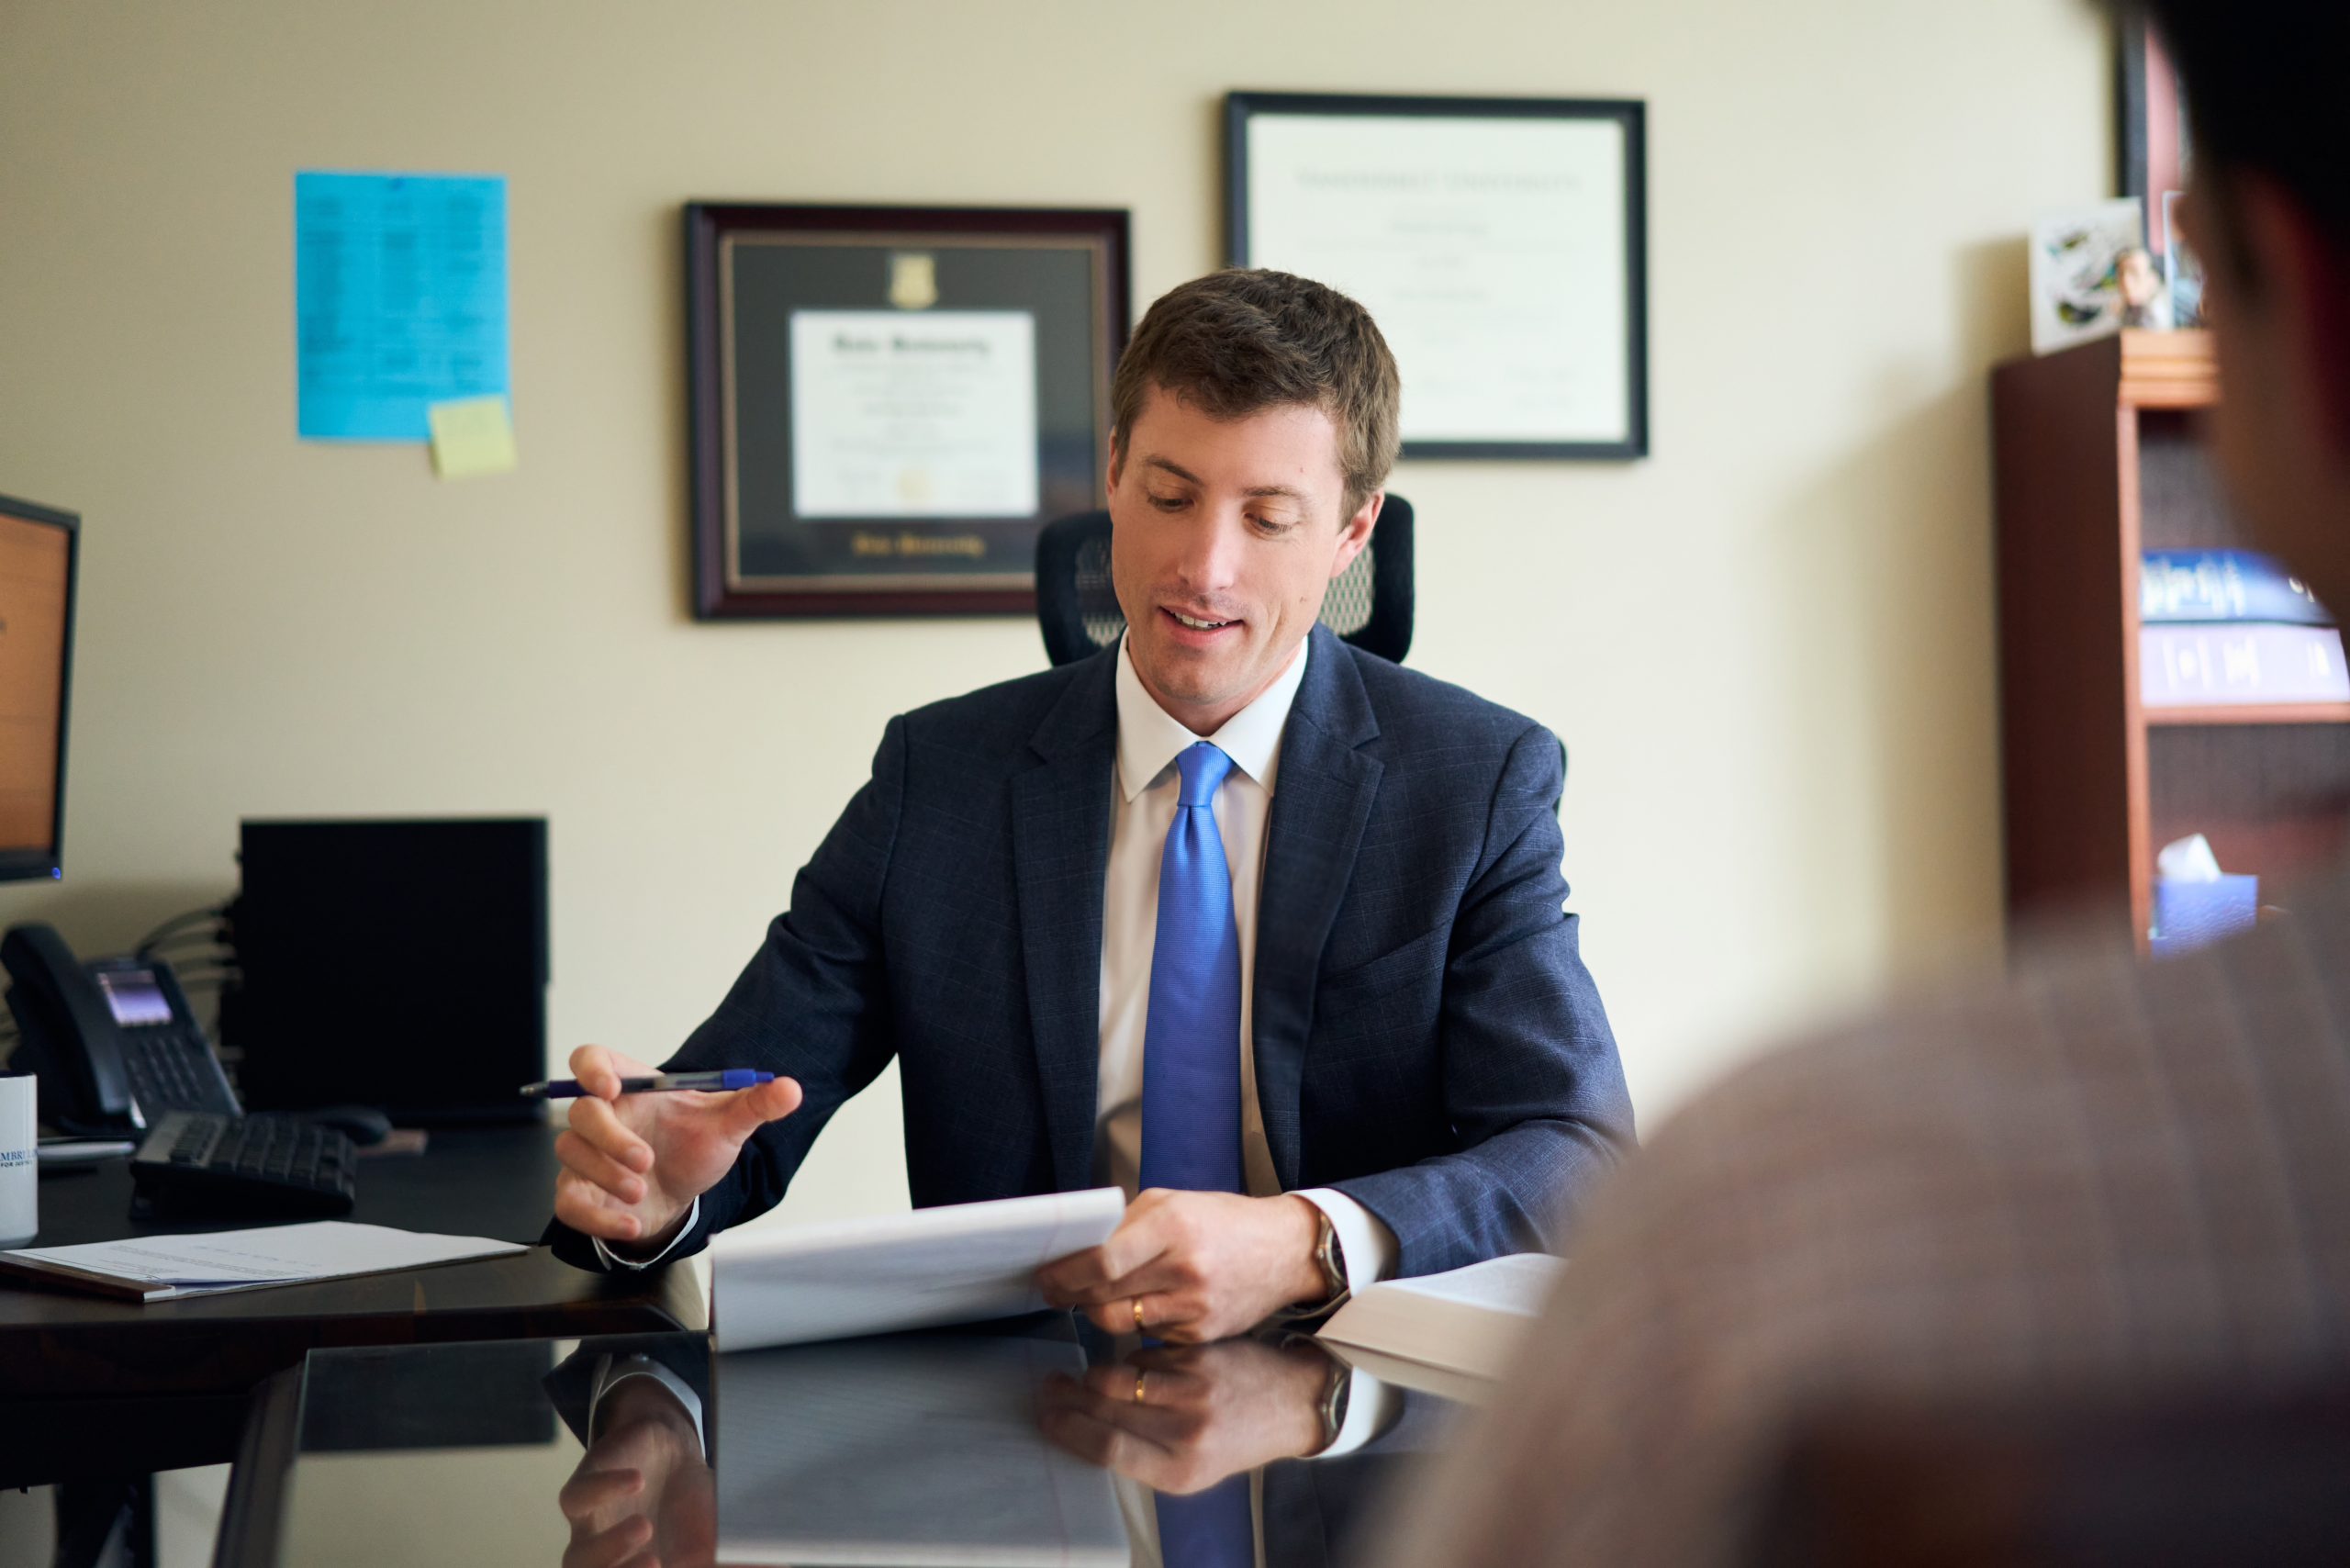 DC Car Accident Lawyer Christopher Regan discusses a case with a client in his Washington, DC office